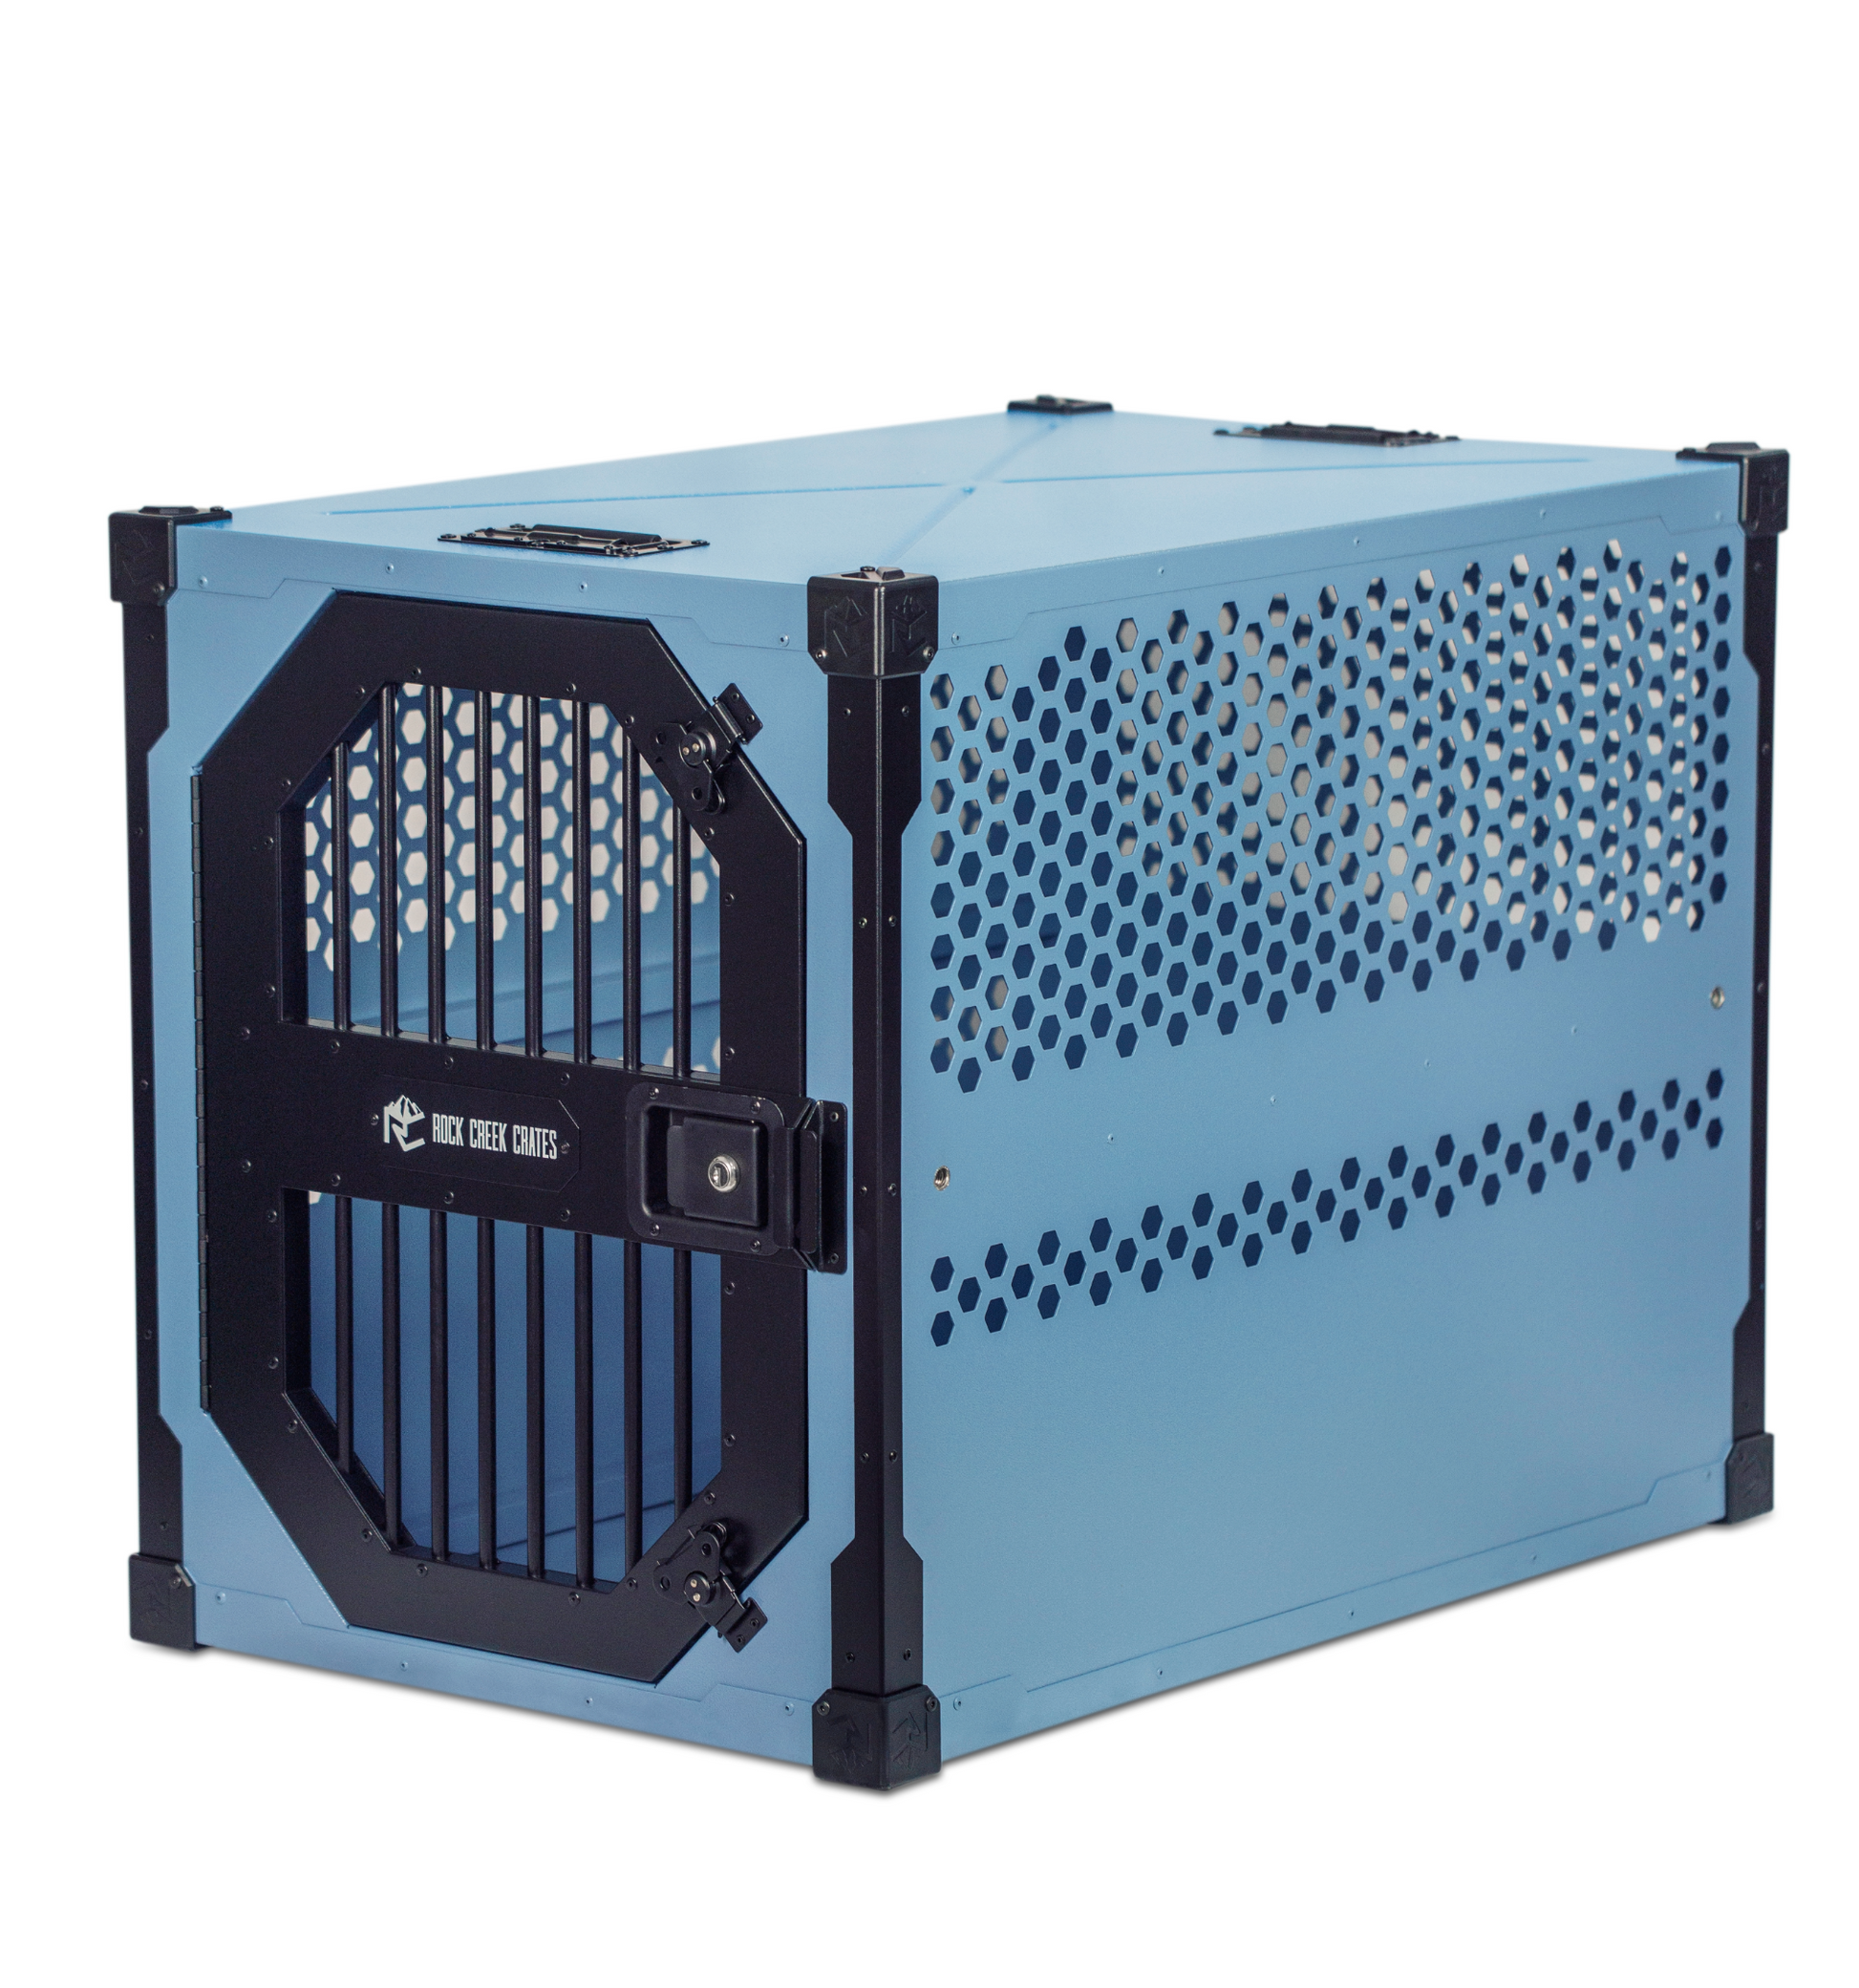 Sky Blue Stationary dog crate by Rock Creek Crates